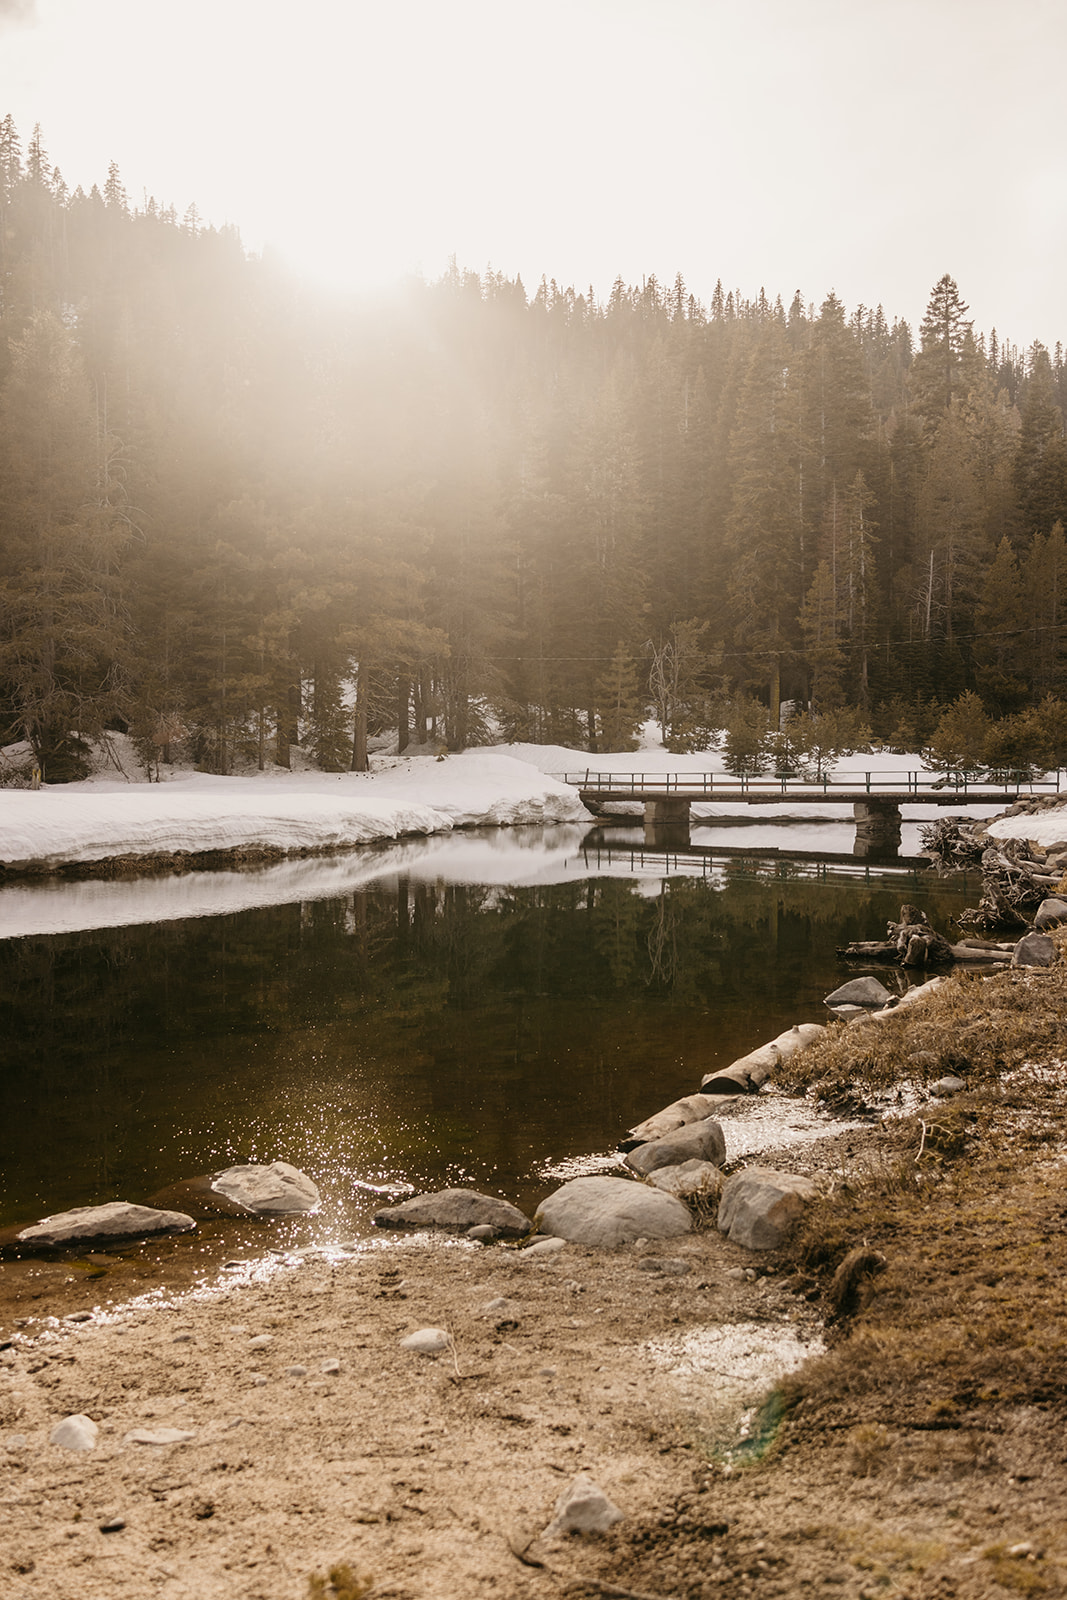 Dani Rawson Photography, a Lake Tahoe-based photographer, shares inspiration for a Truckee River Couples Session